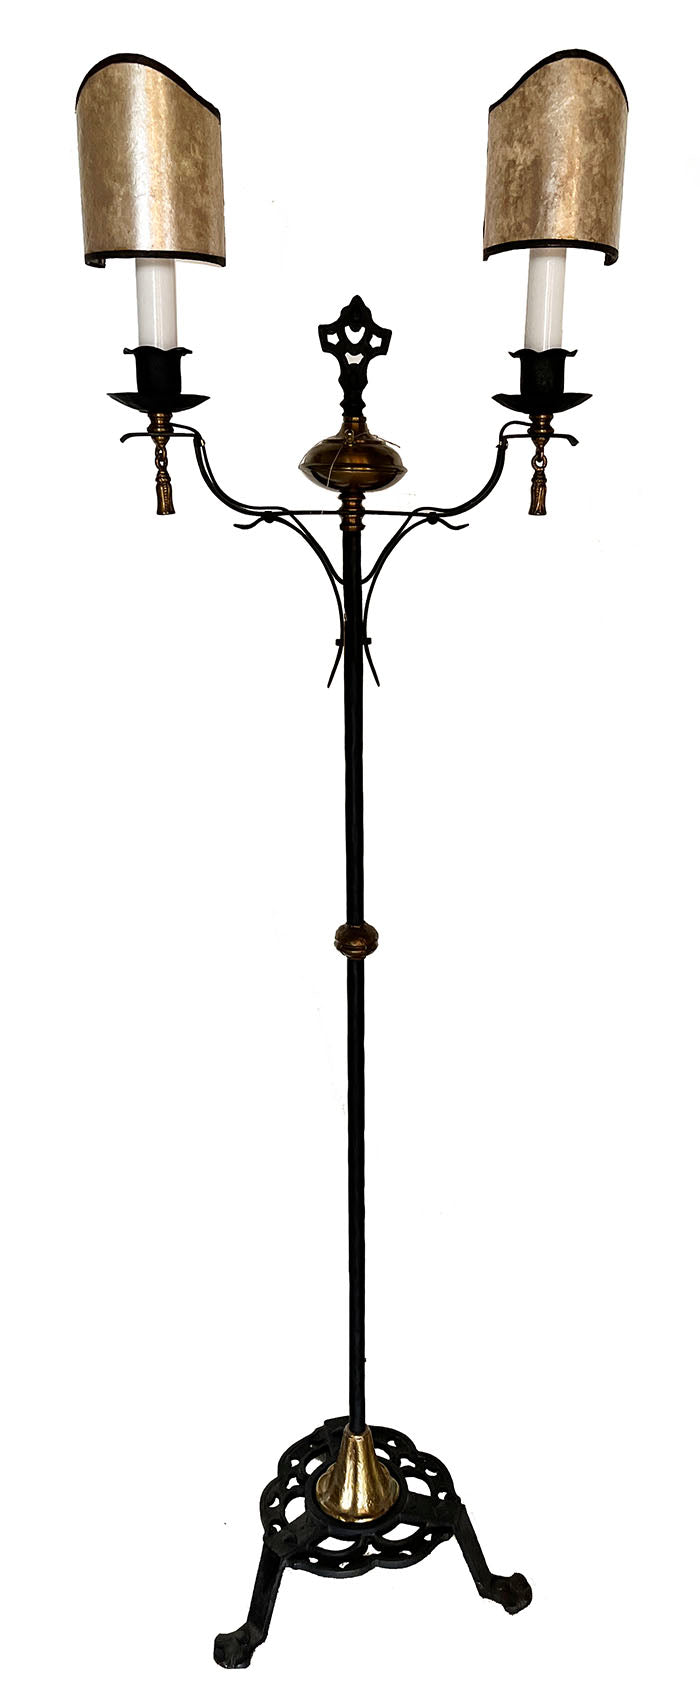 Antique Circa 1915 Tudor Revival Double Arm Wrought Iron and Brass Floor lamp with Mica Sheild Shades